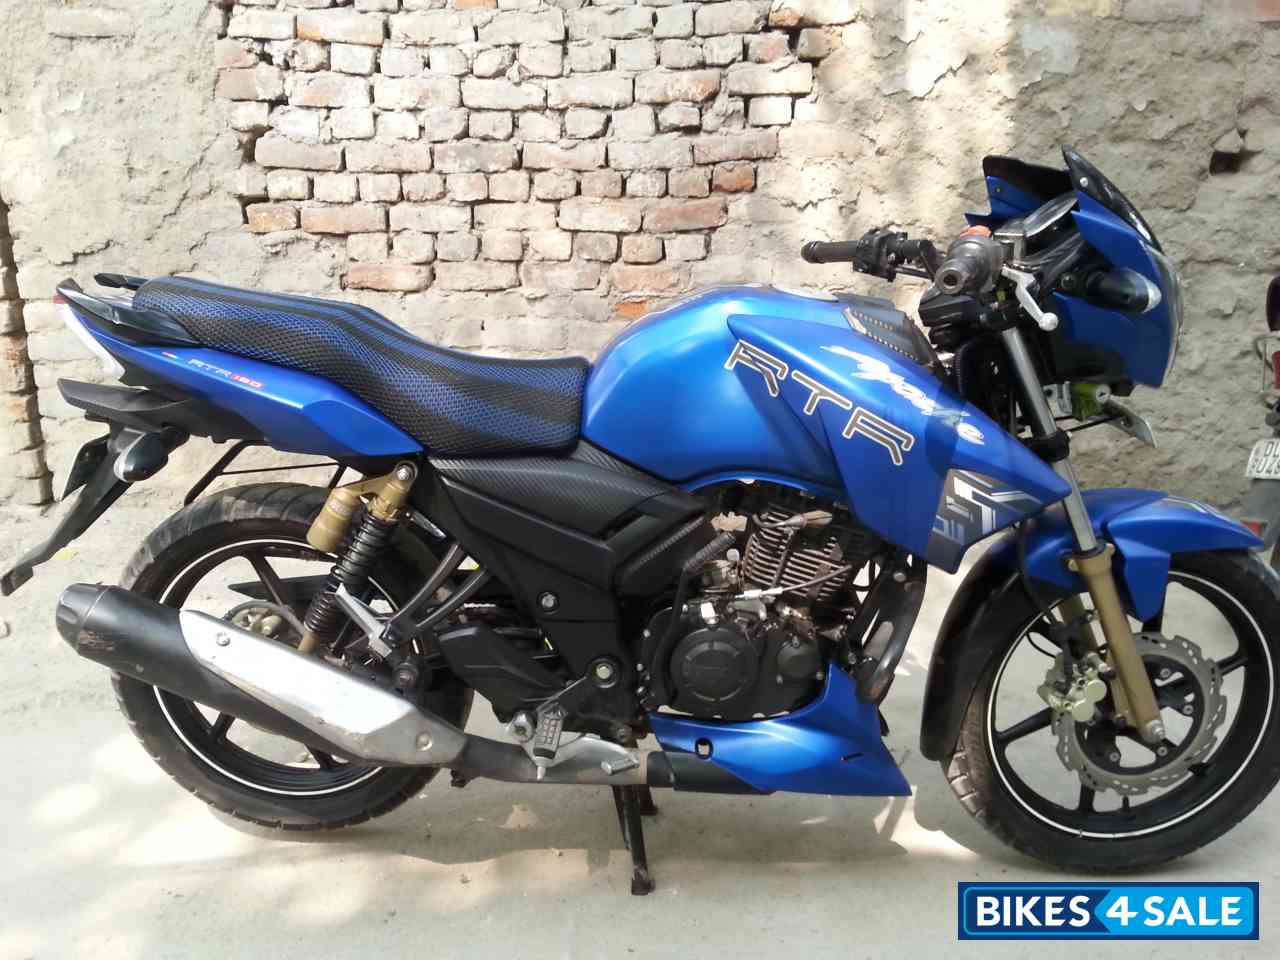 Used 2016 Model Tvs Apache Rtr 180 For Sale In New Delhi Id